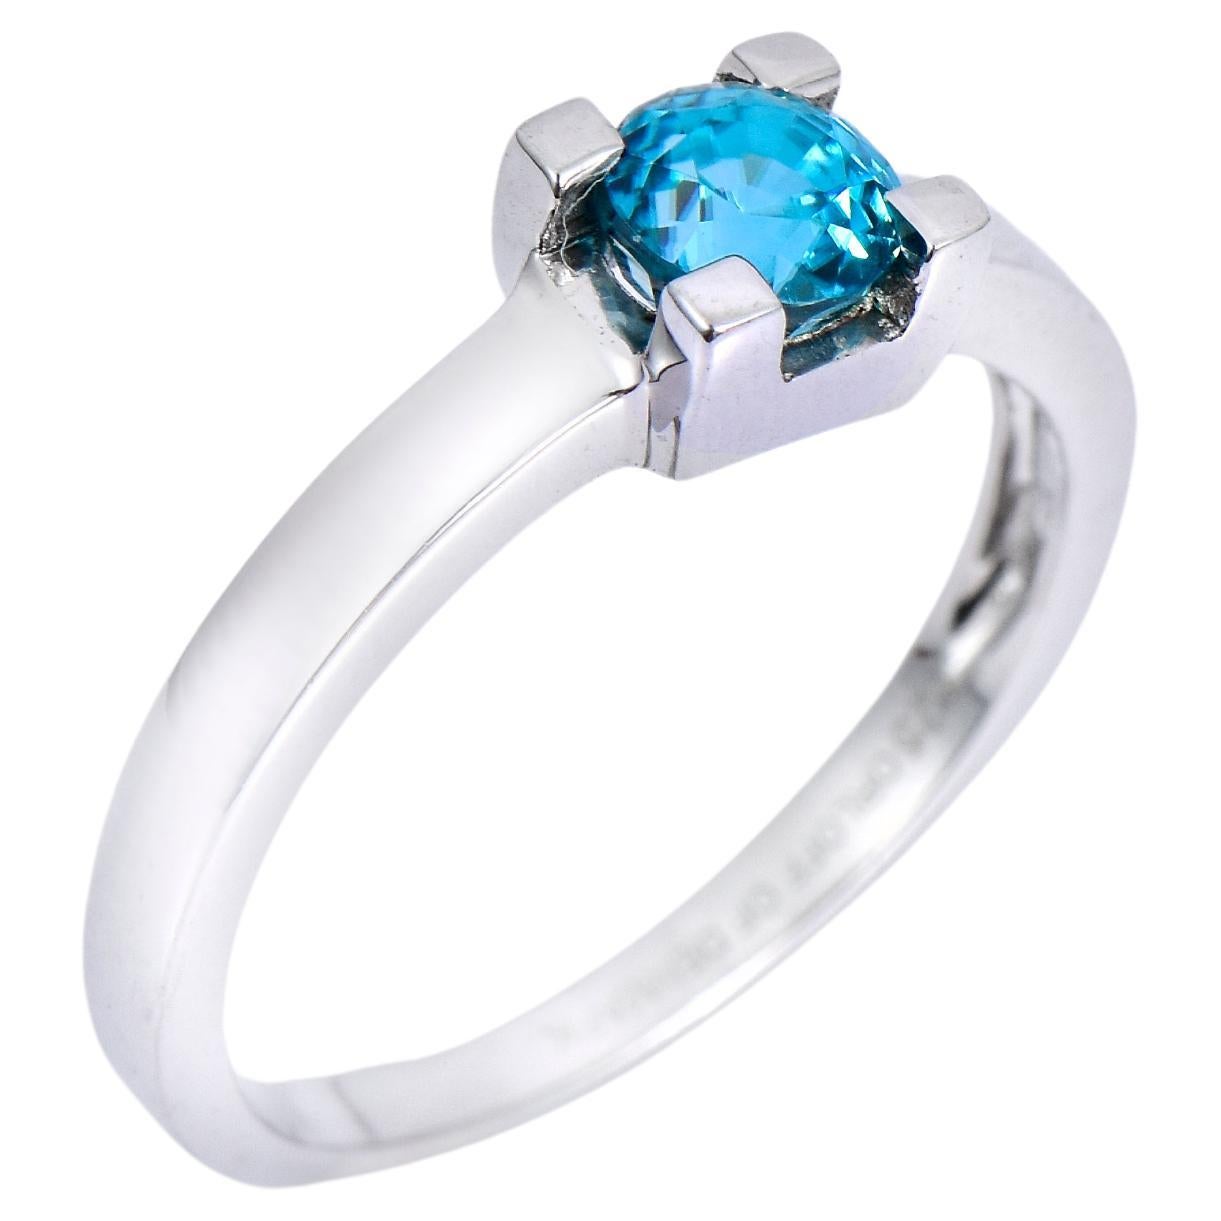 Orloff of Denmark, 1.09 ct Natural Blue Zircon Ring in 925 Sterling Silver For Sale